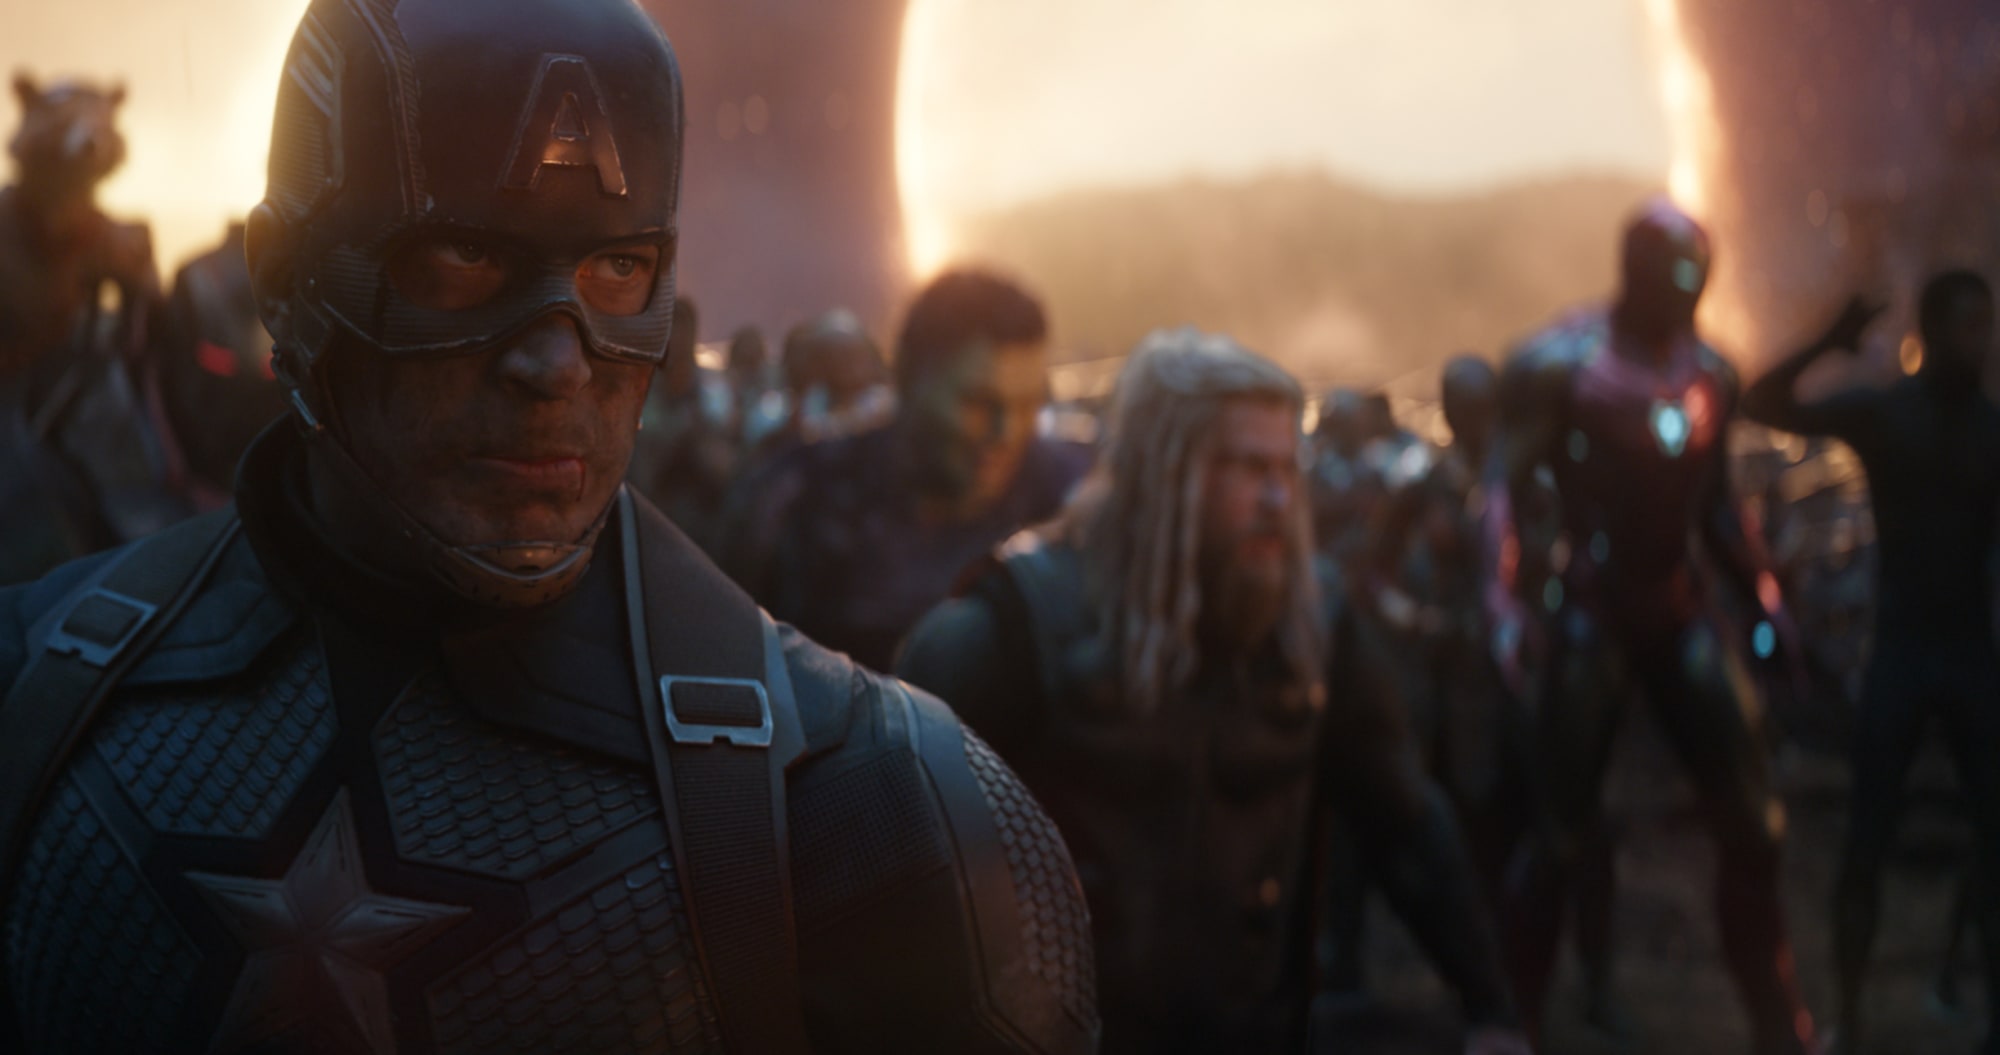 Viral Avengers Endgame Reaction Has People Missing Movie Theaters